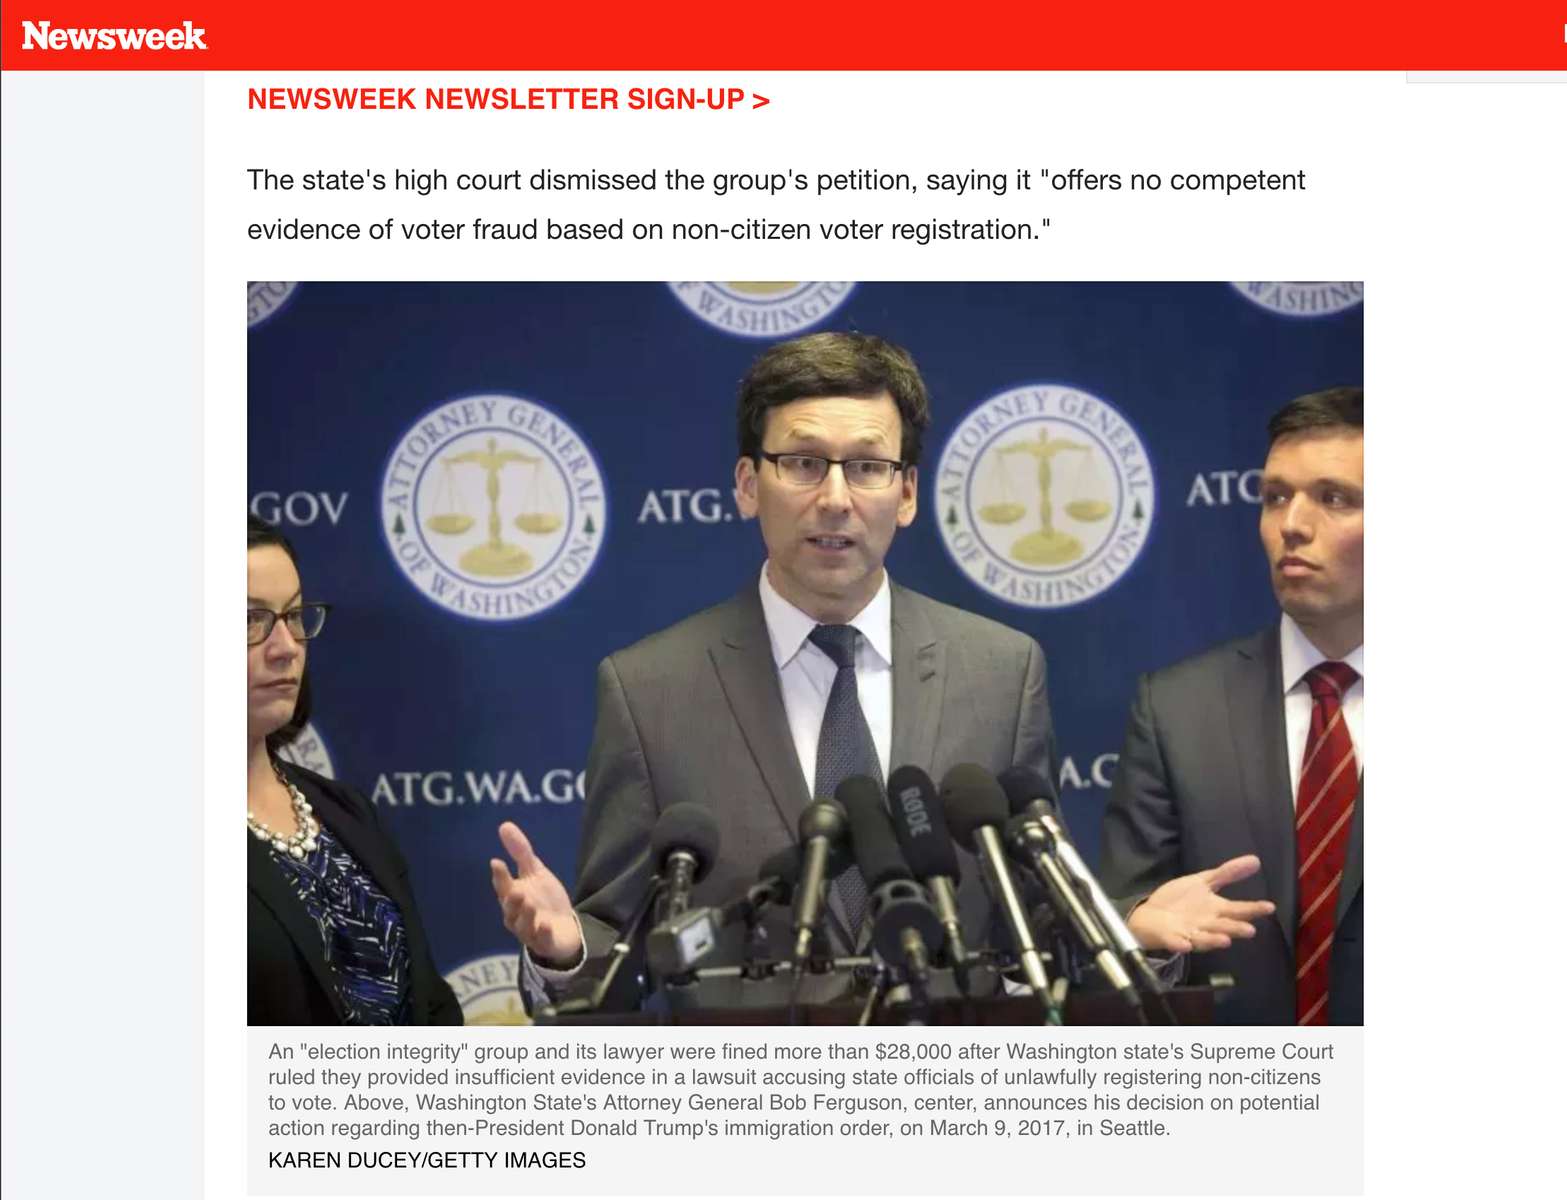 {quote}'Stop the Steal' Group Fined Over Lack of Evidence in Voter Fraud Lawsuit{quote} for Getty Images published in Newsweek on June 2, 2022